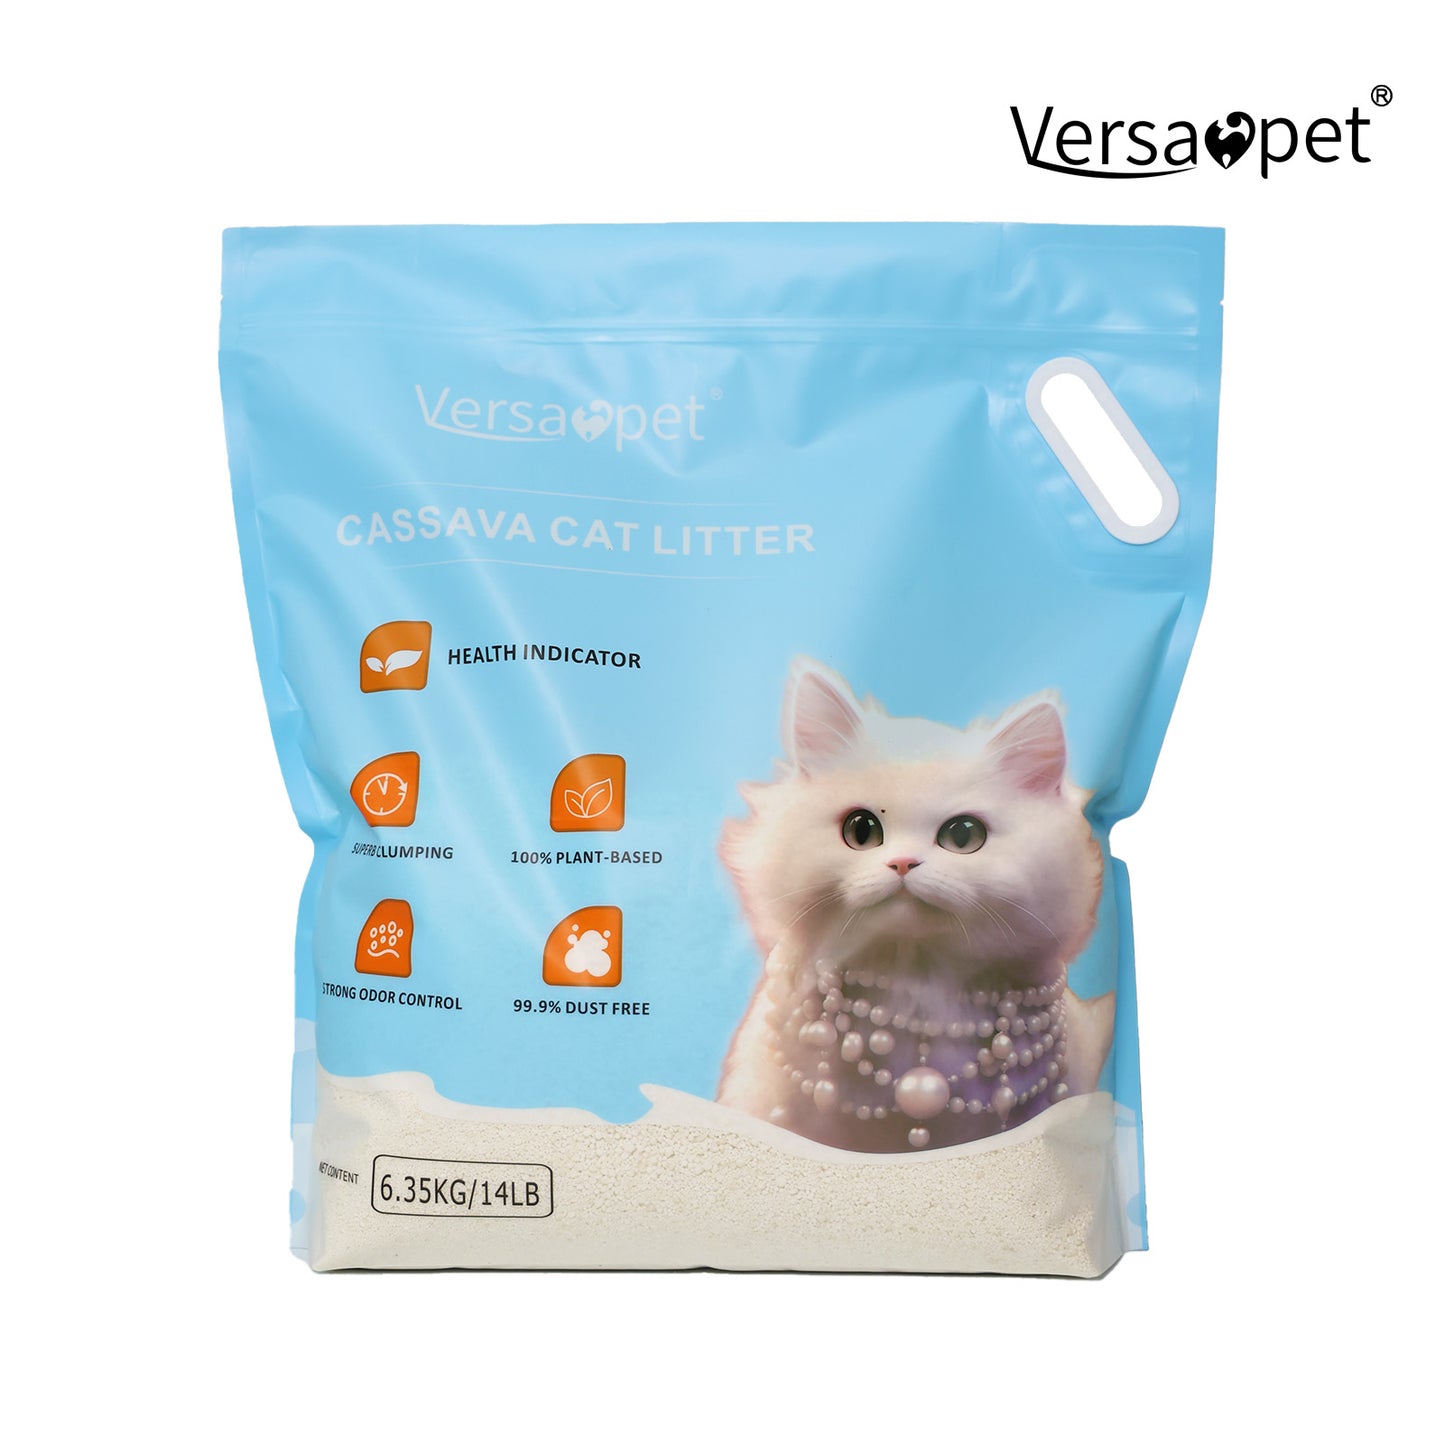 VersaPet Cassava Cat Litter - Detect Urine Blood | No Dust | Superb Clumping | Fragrance-Free | Strong Odor Control | Plant Based  (14lb)